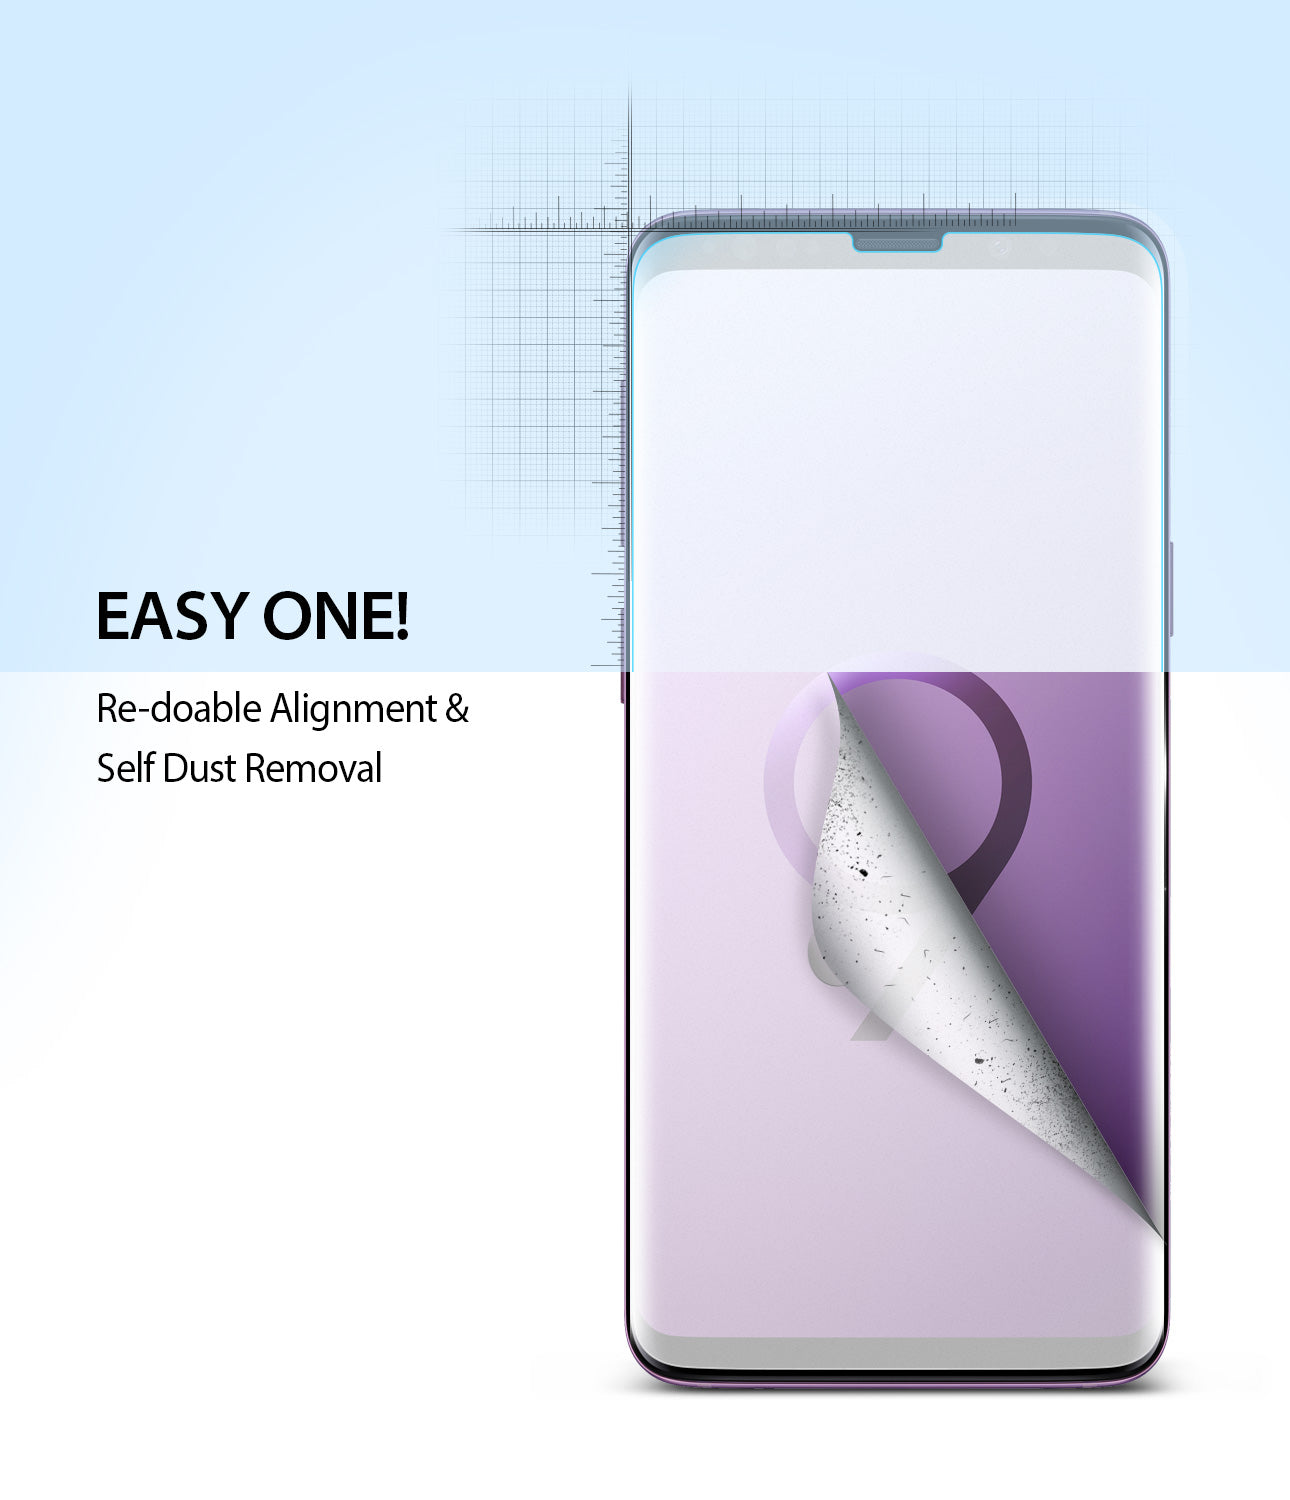 galaxy s9 dual easy full cover screen protector 2 pack